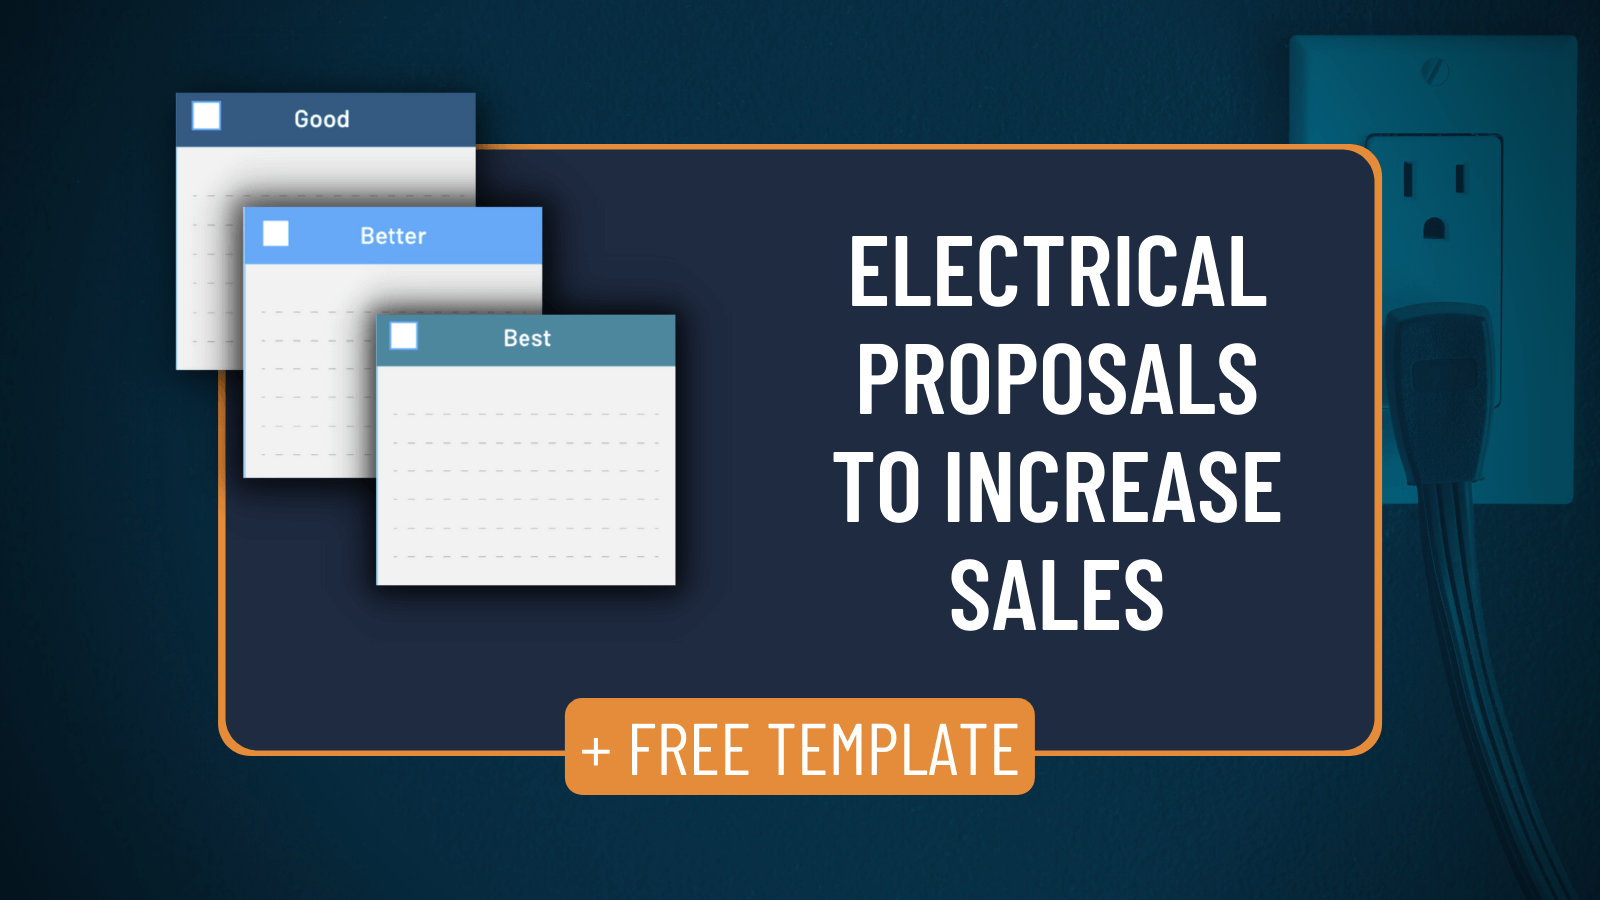 Free Electrical Proposal Template Present Good Better Best